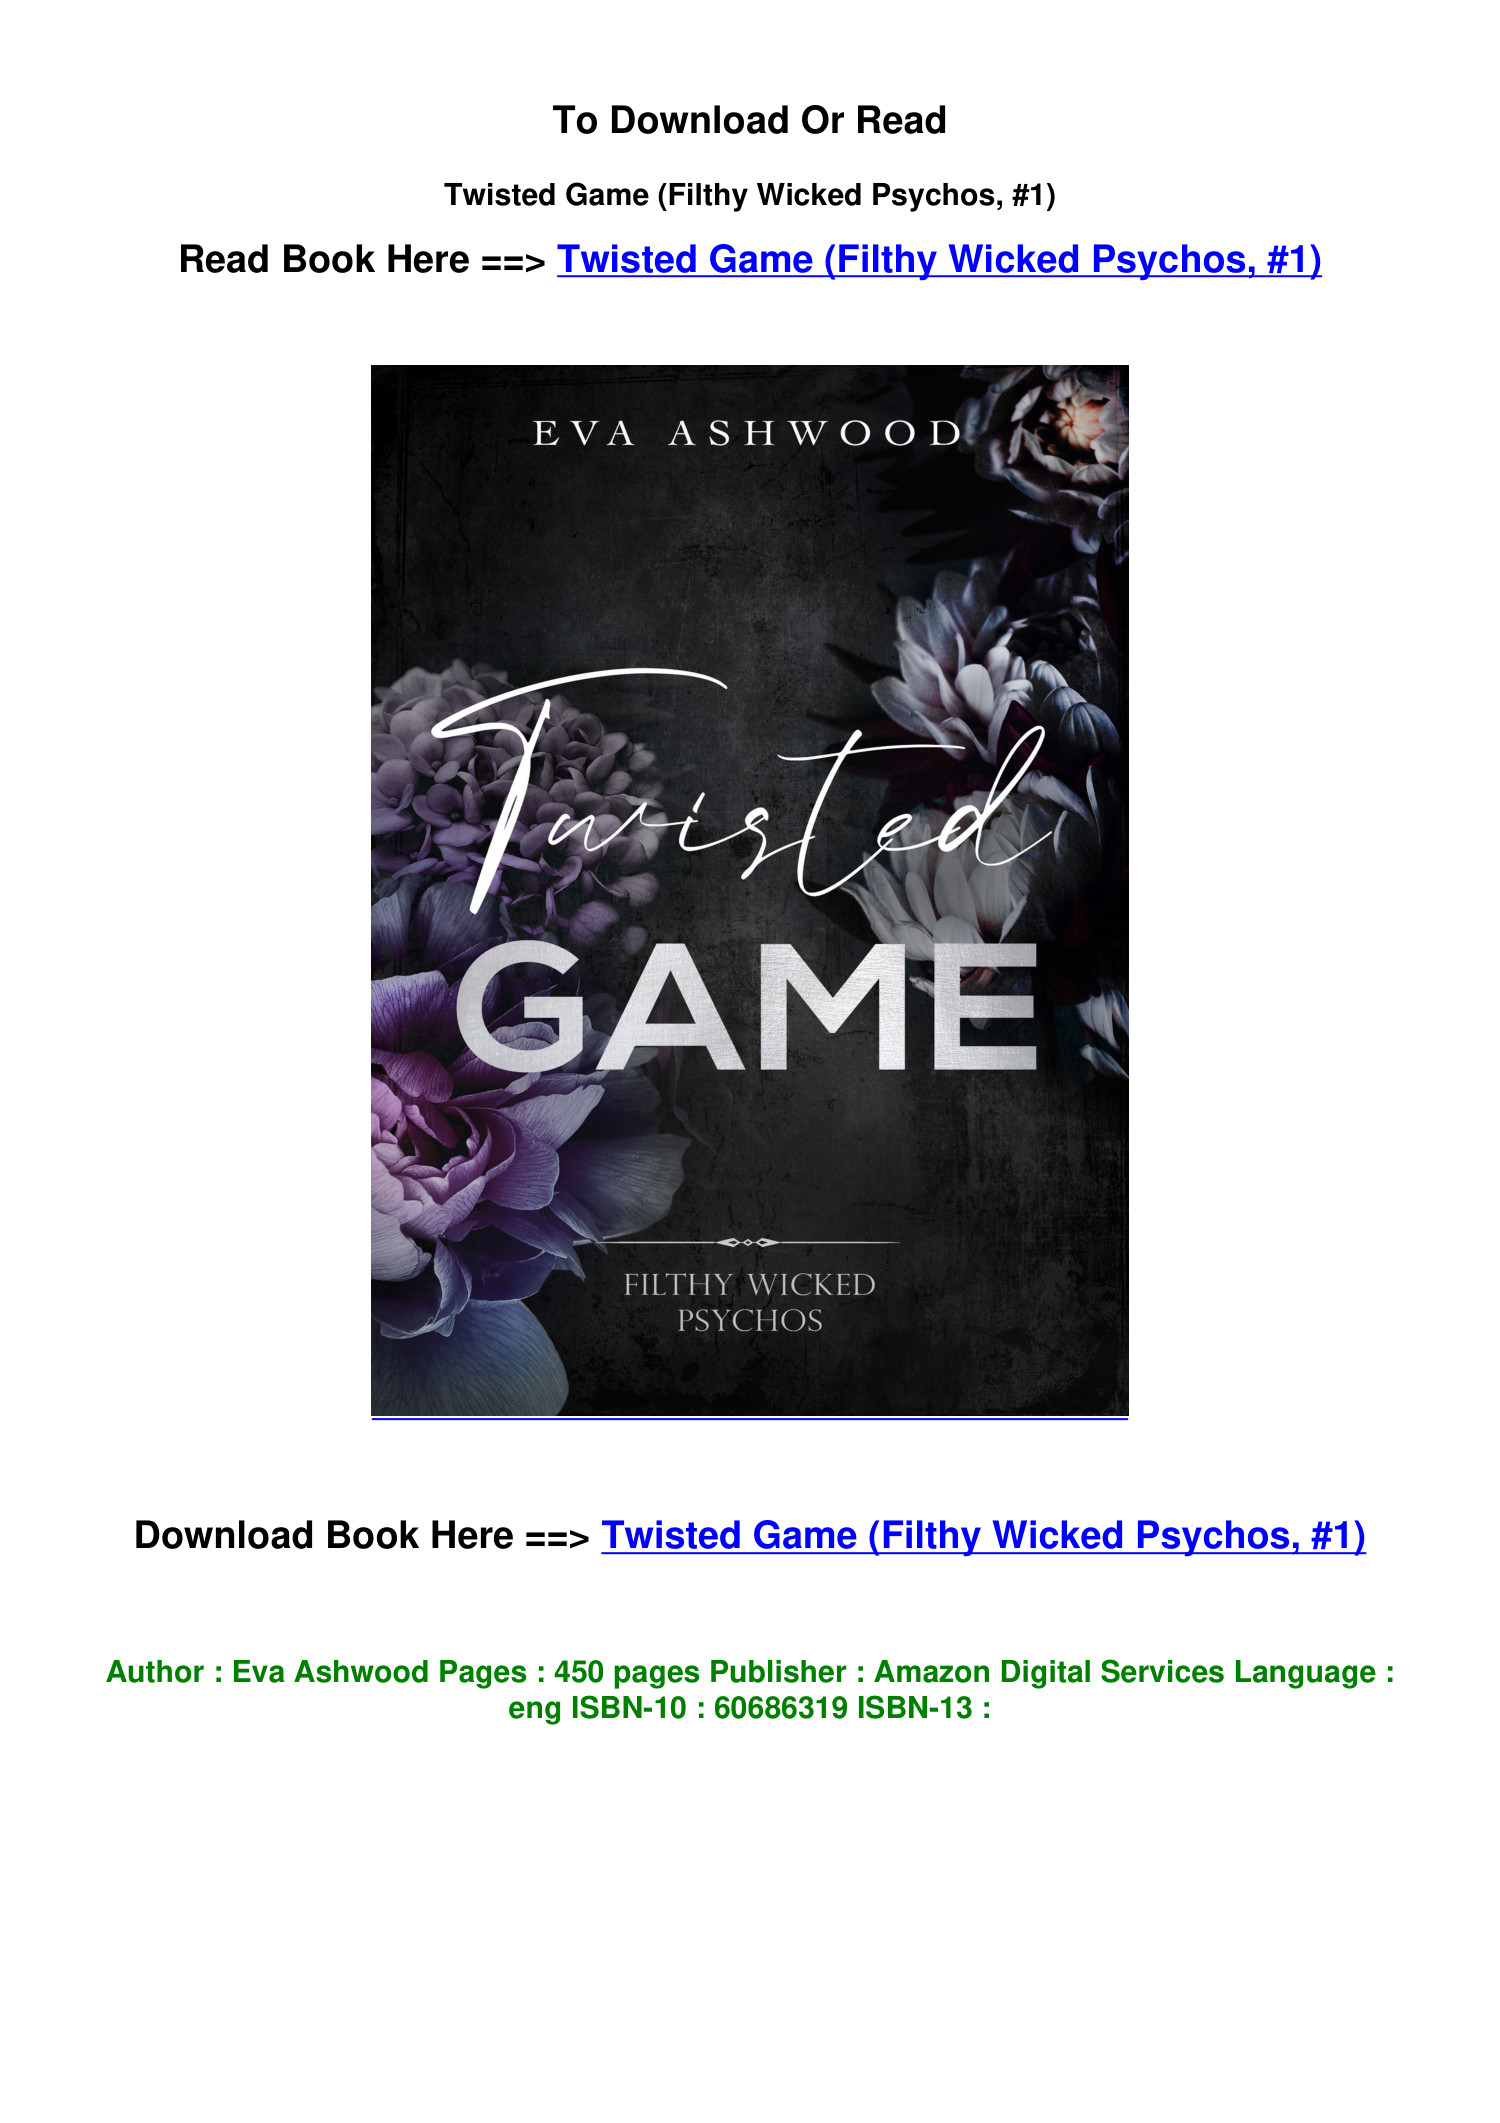 Twisted Game (Filthy Wicked Psychos, #1) by Eva Ashwood